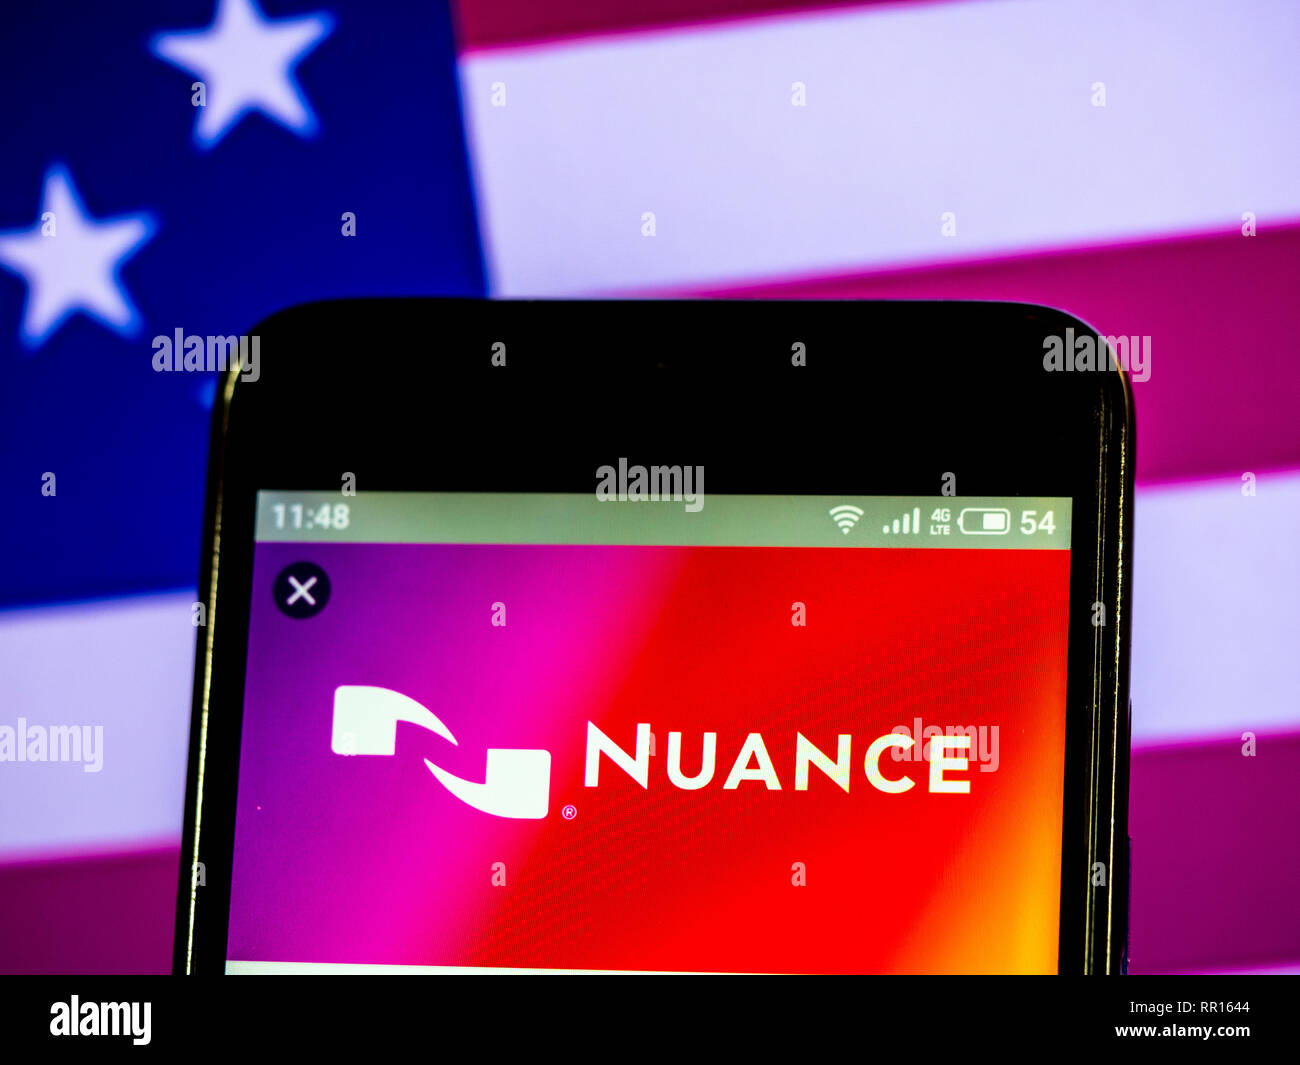 Nuance Communications multinational computer software technology corporation logo seen displayed on smart phone Stock Photo